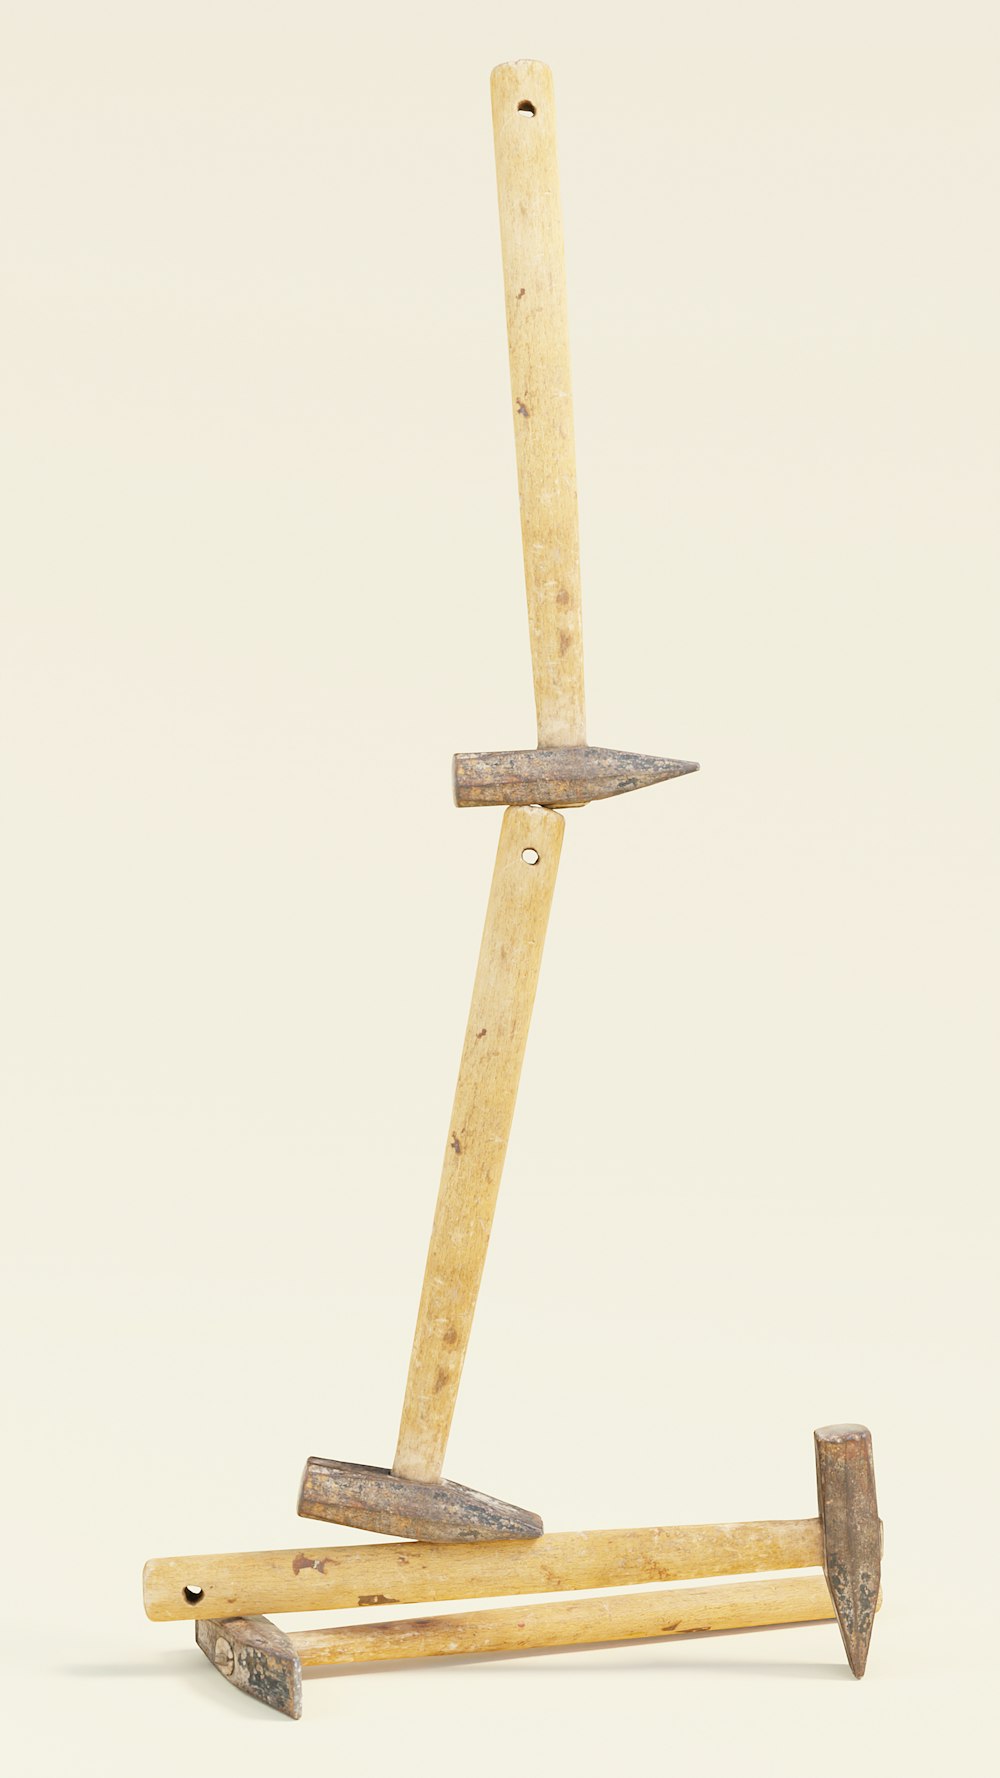 a wooden object with a long stick sticking out of it